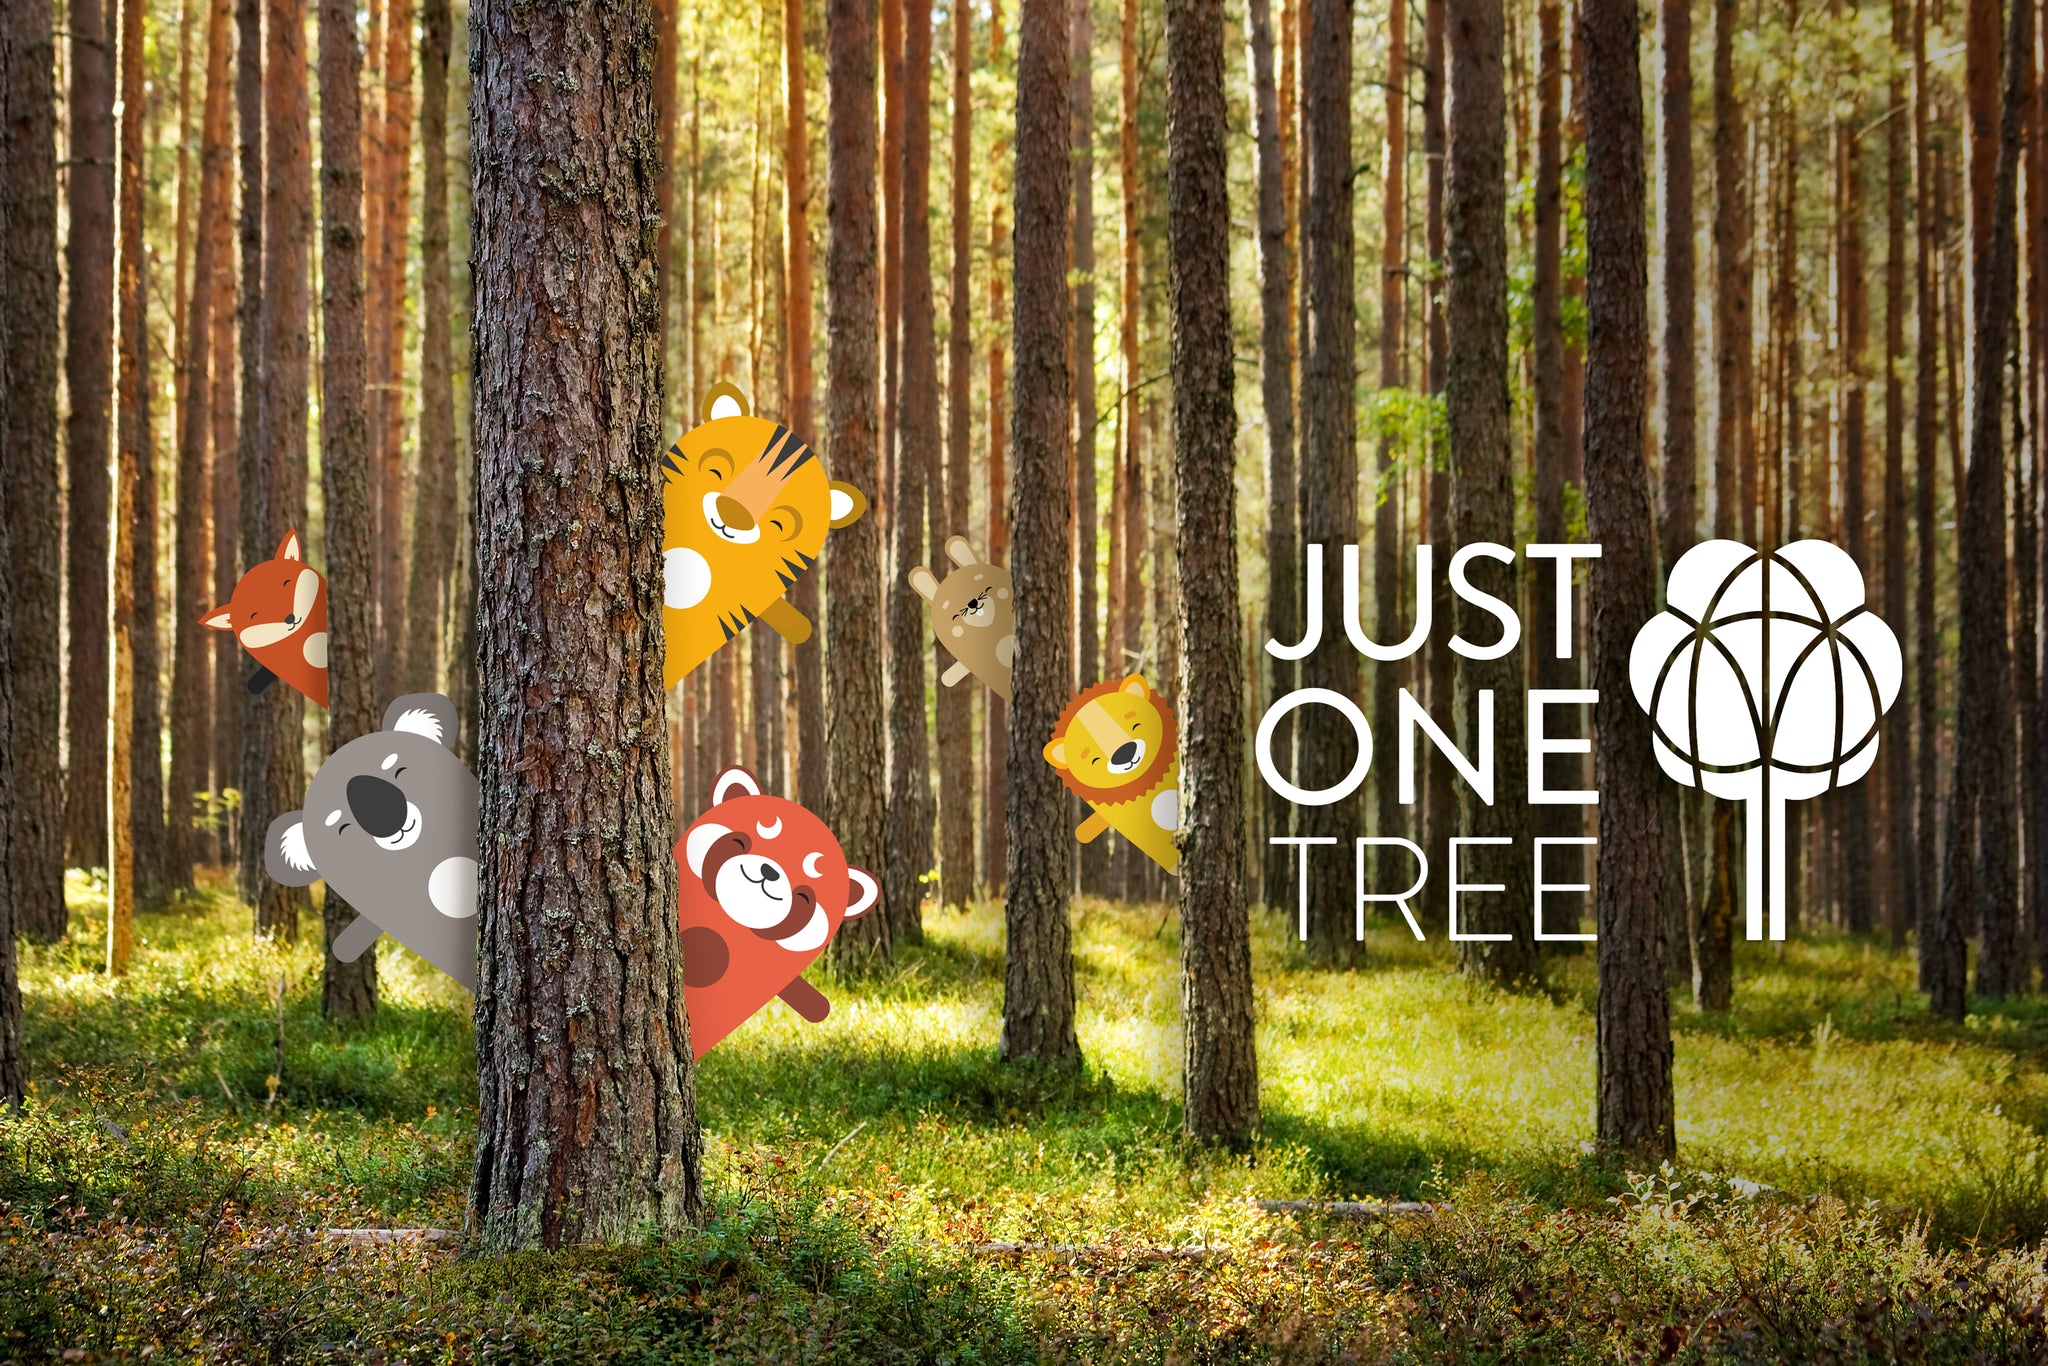 OddlyWild in partnership with Just One Tree campaign